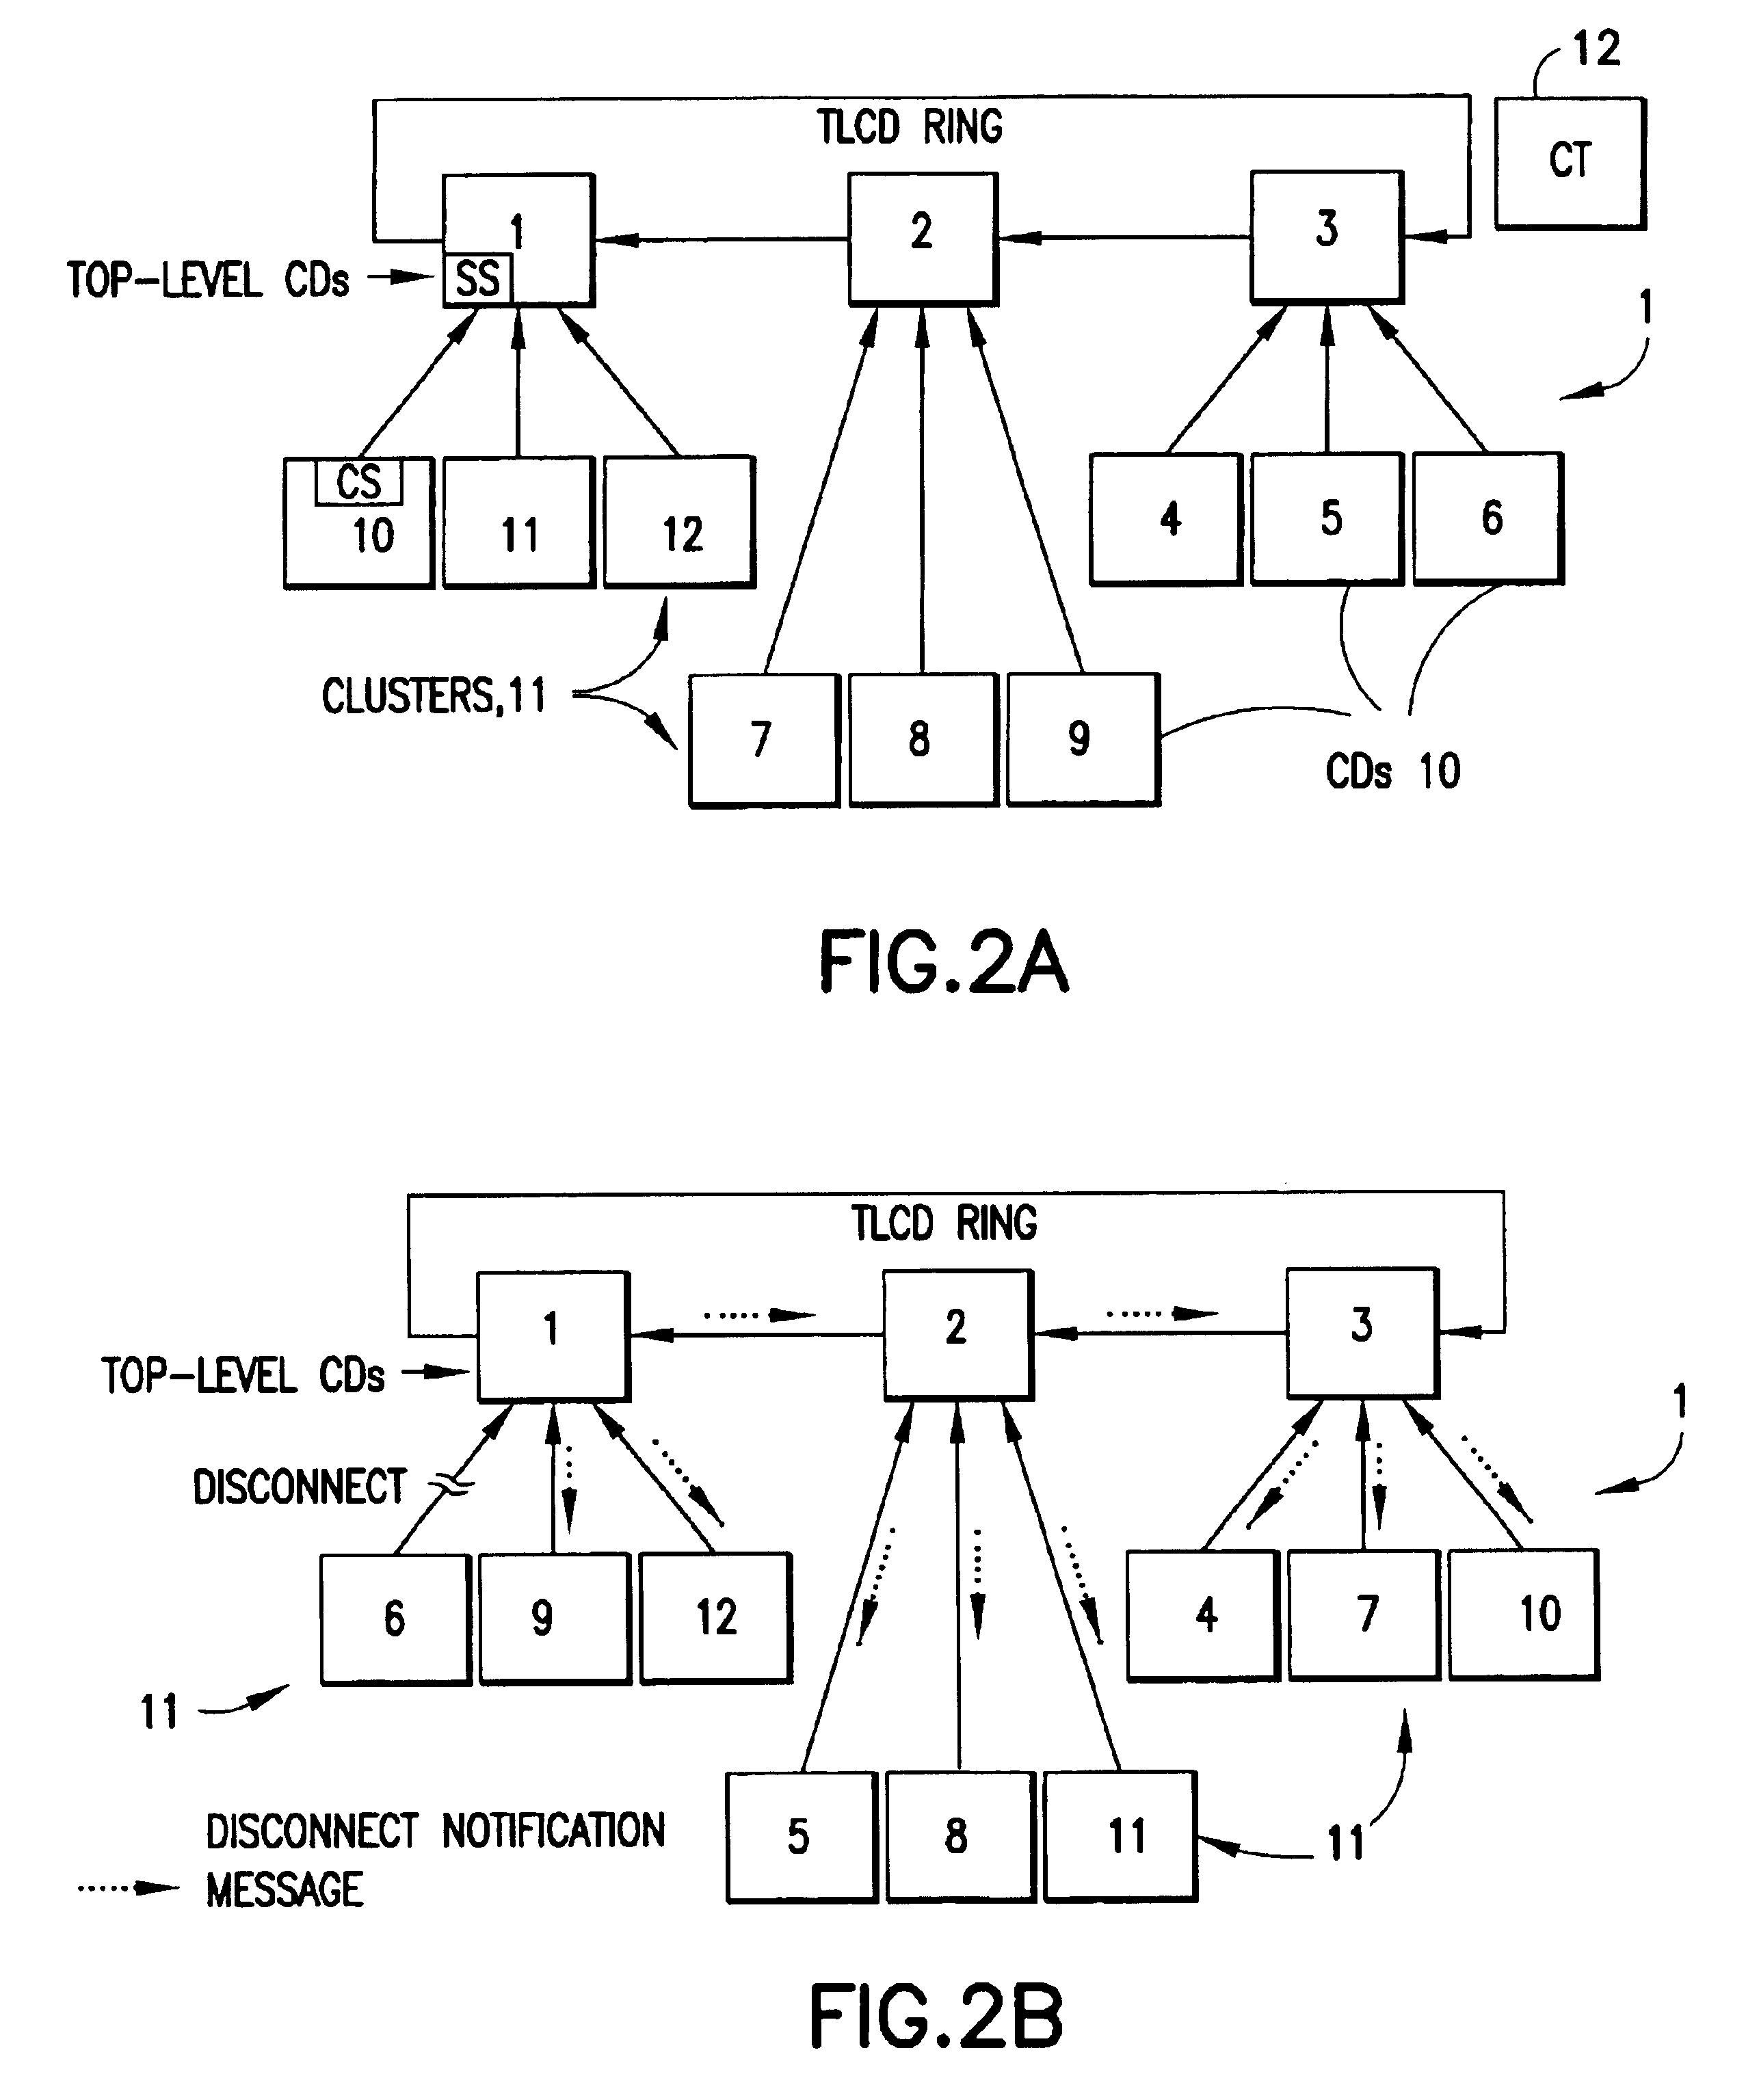 System and methods providing automatic distributed data retrieval, analysis and reporting services